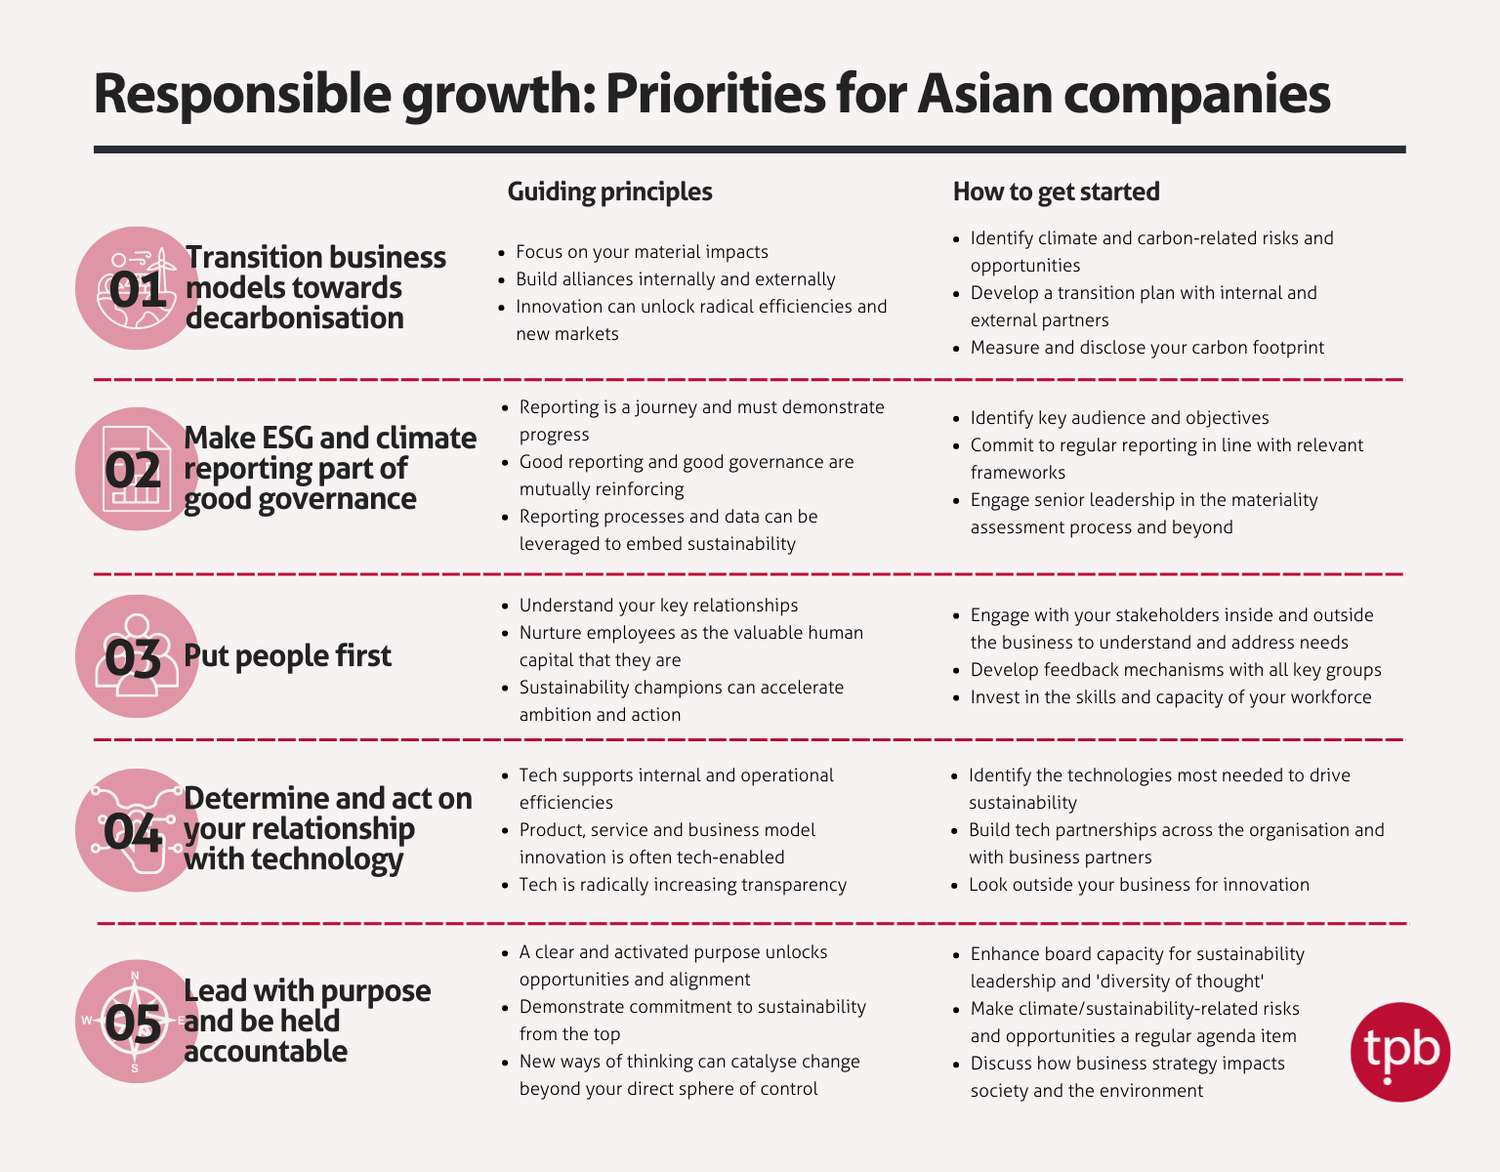 Responsible growth priorities for Asian businesses in 2022 and beyond